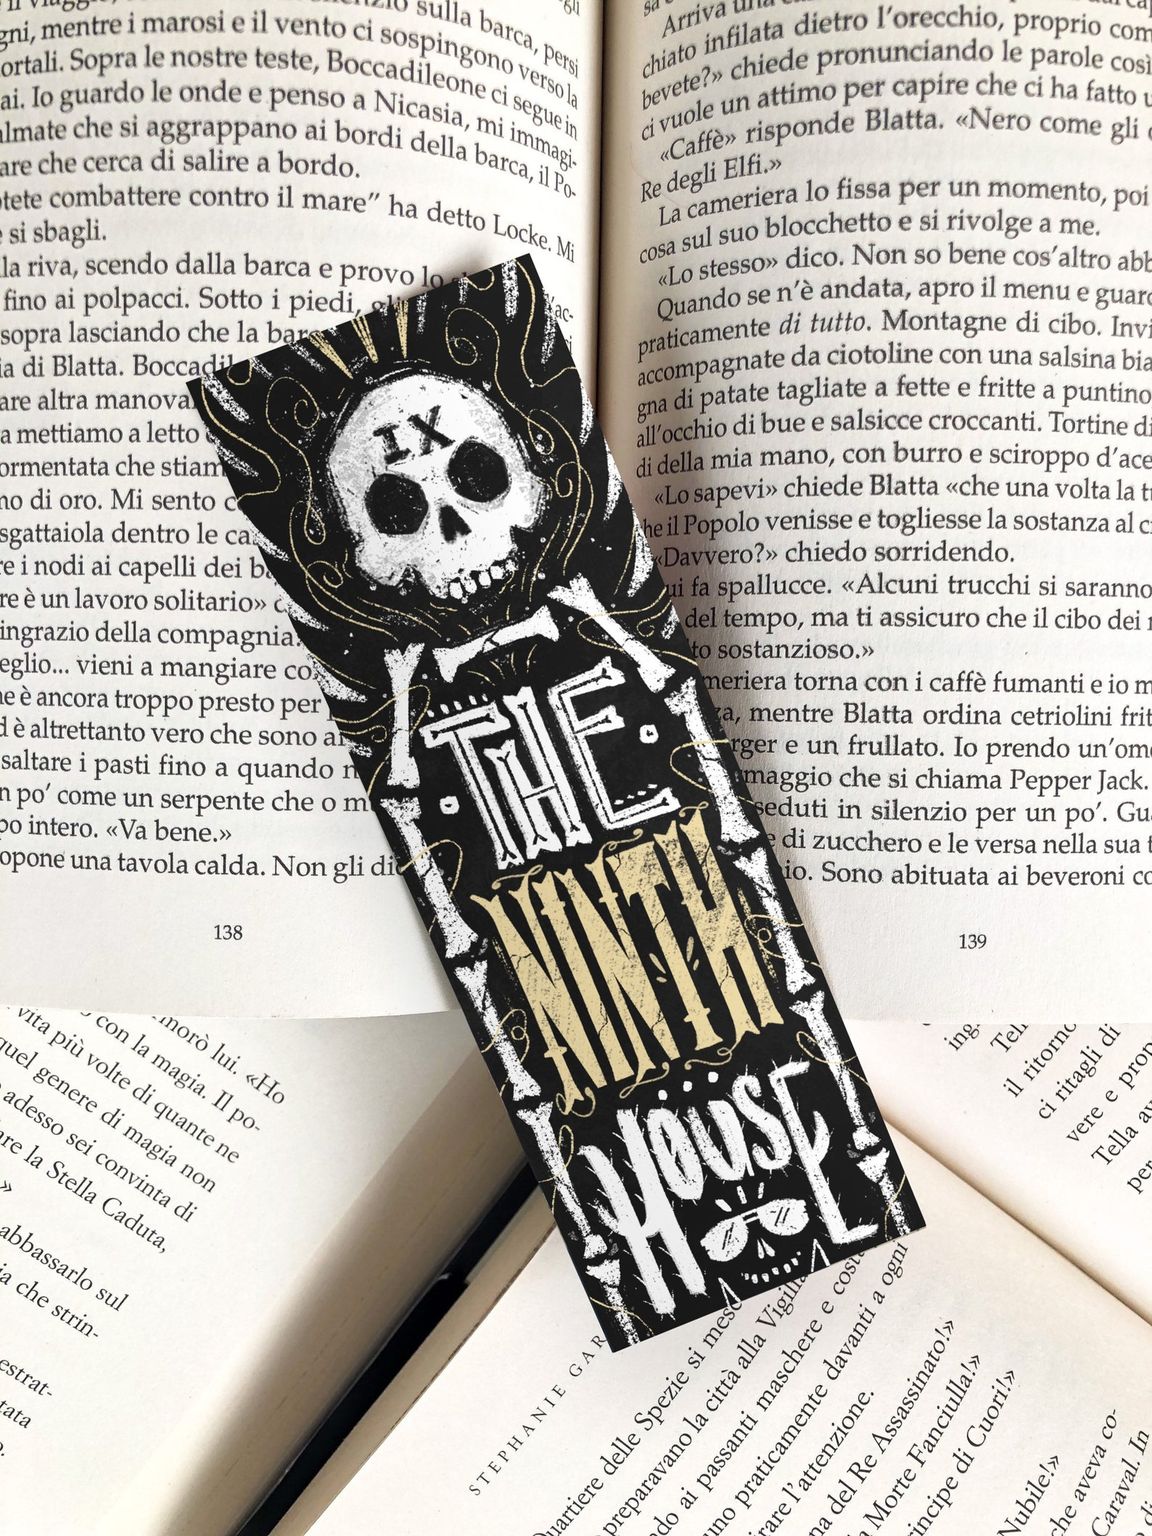 ninth house book review